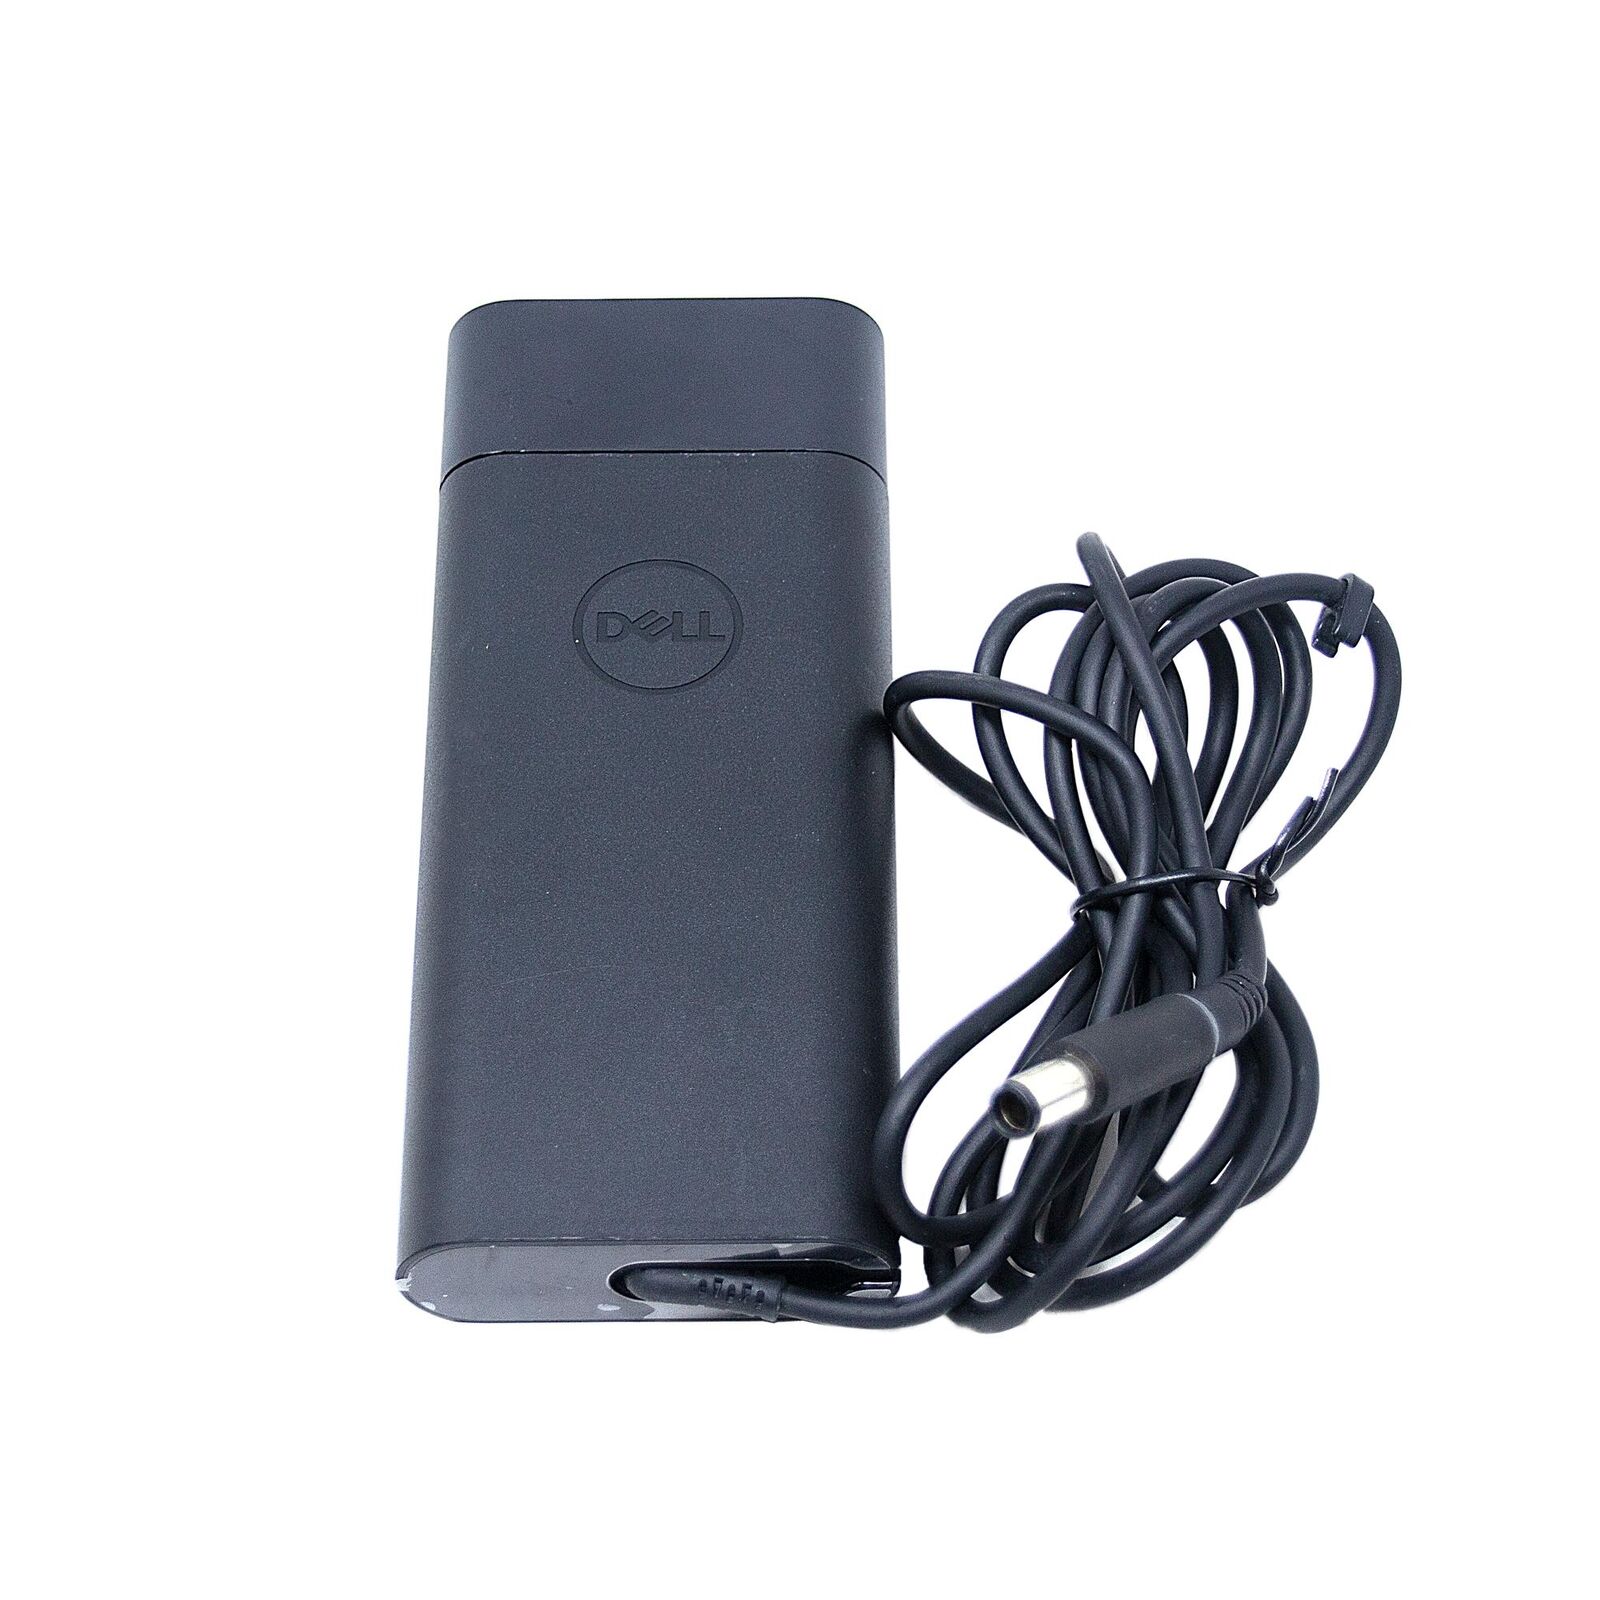 DELL Latitude  D830 PP04X 19.5V 4.62A Genuine AC Adapter